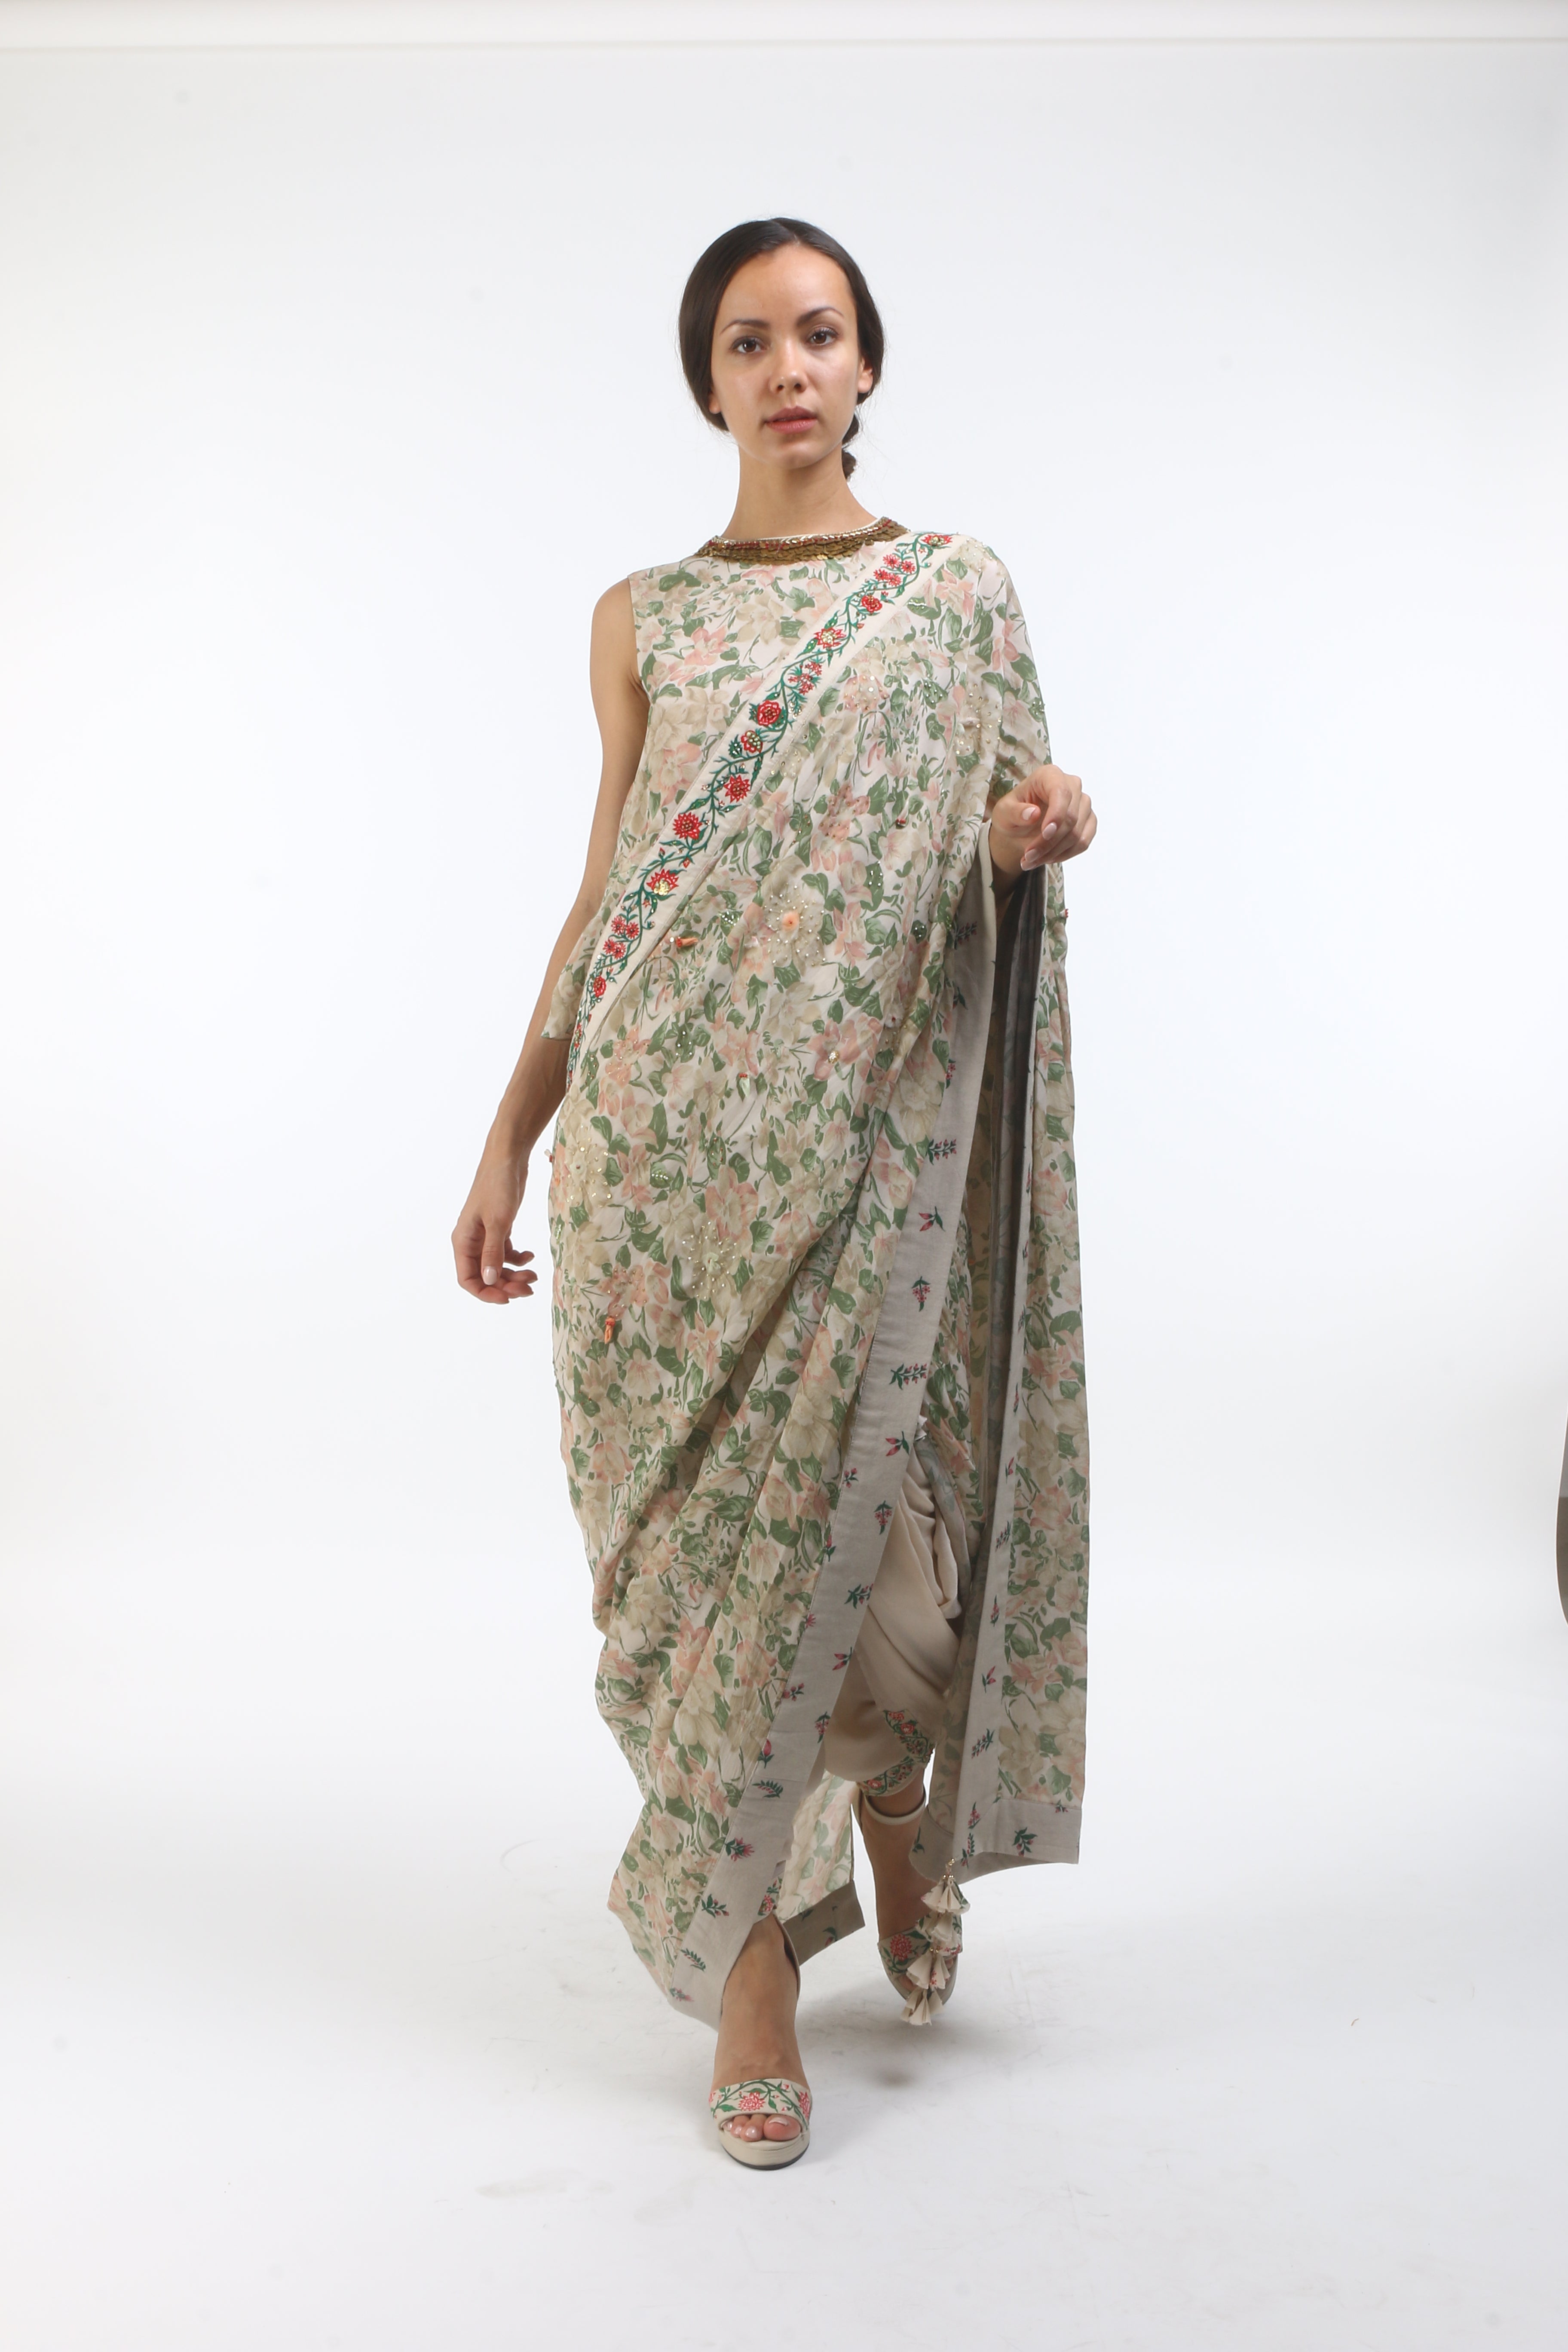 printed and embellished crepe dhoti saree with a back open blouse in layered coin embroidered neckline.